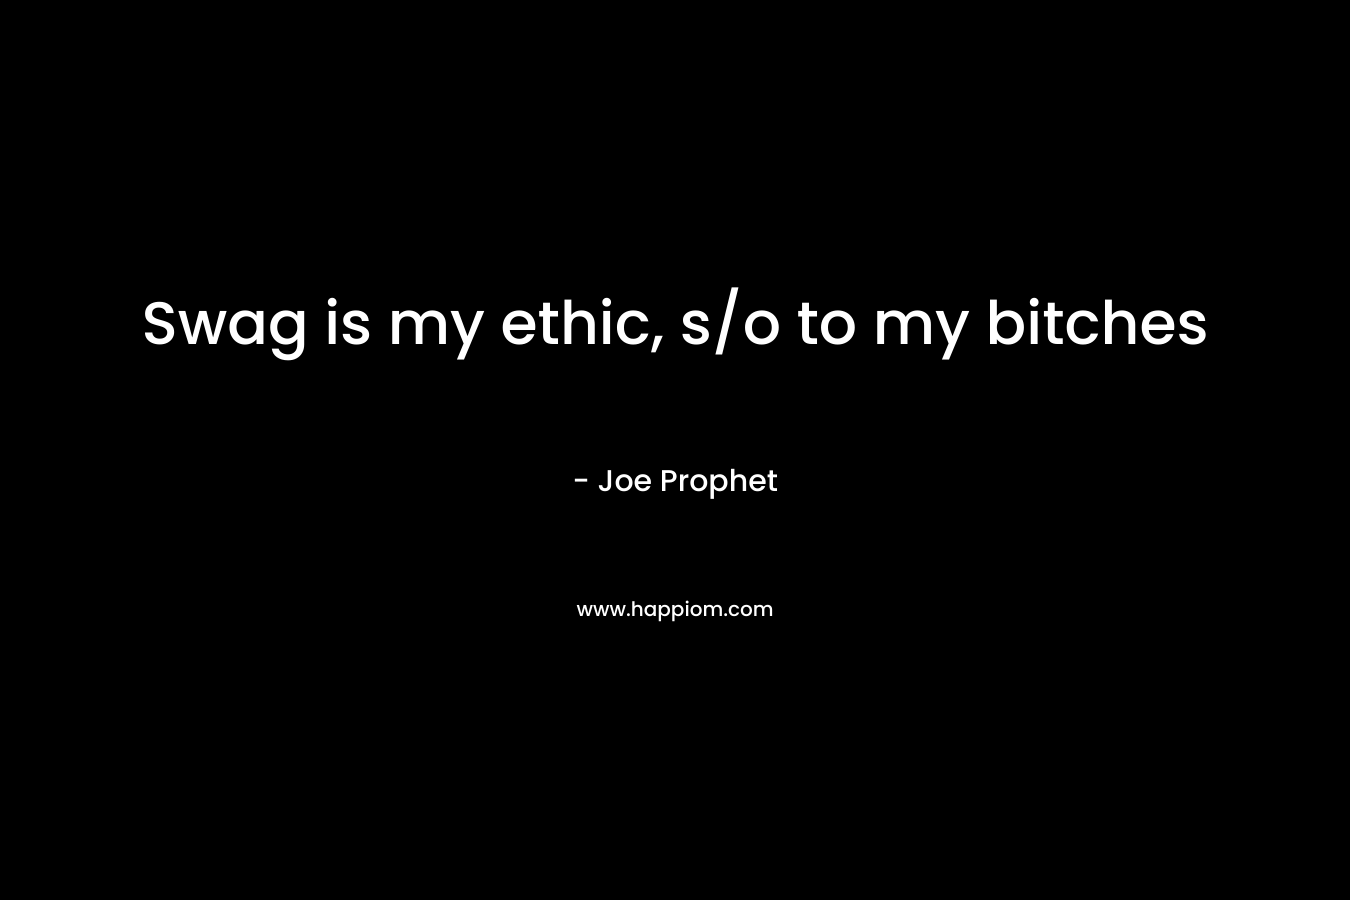 Swag is my ethic, s/o to my bitches – Joe Prophet